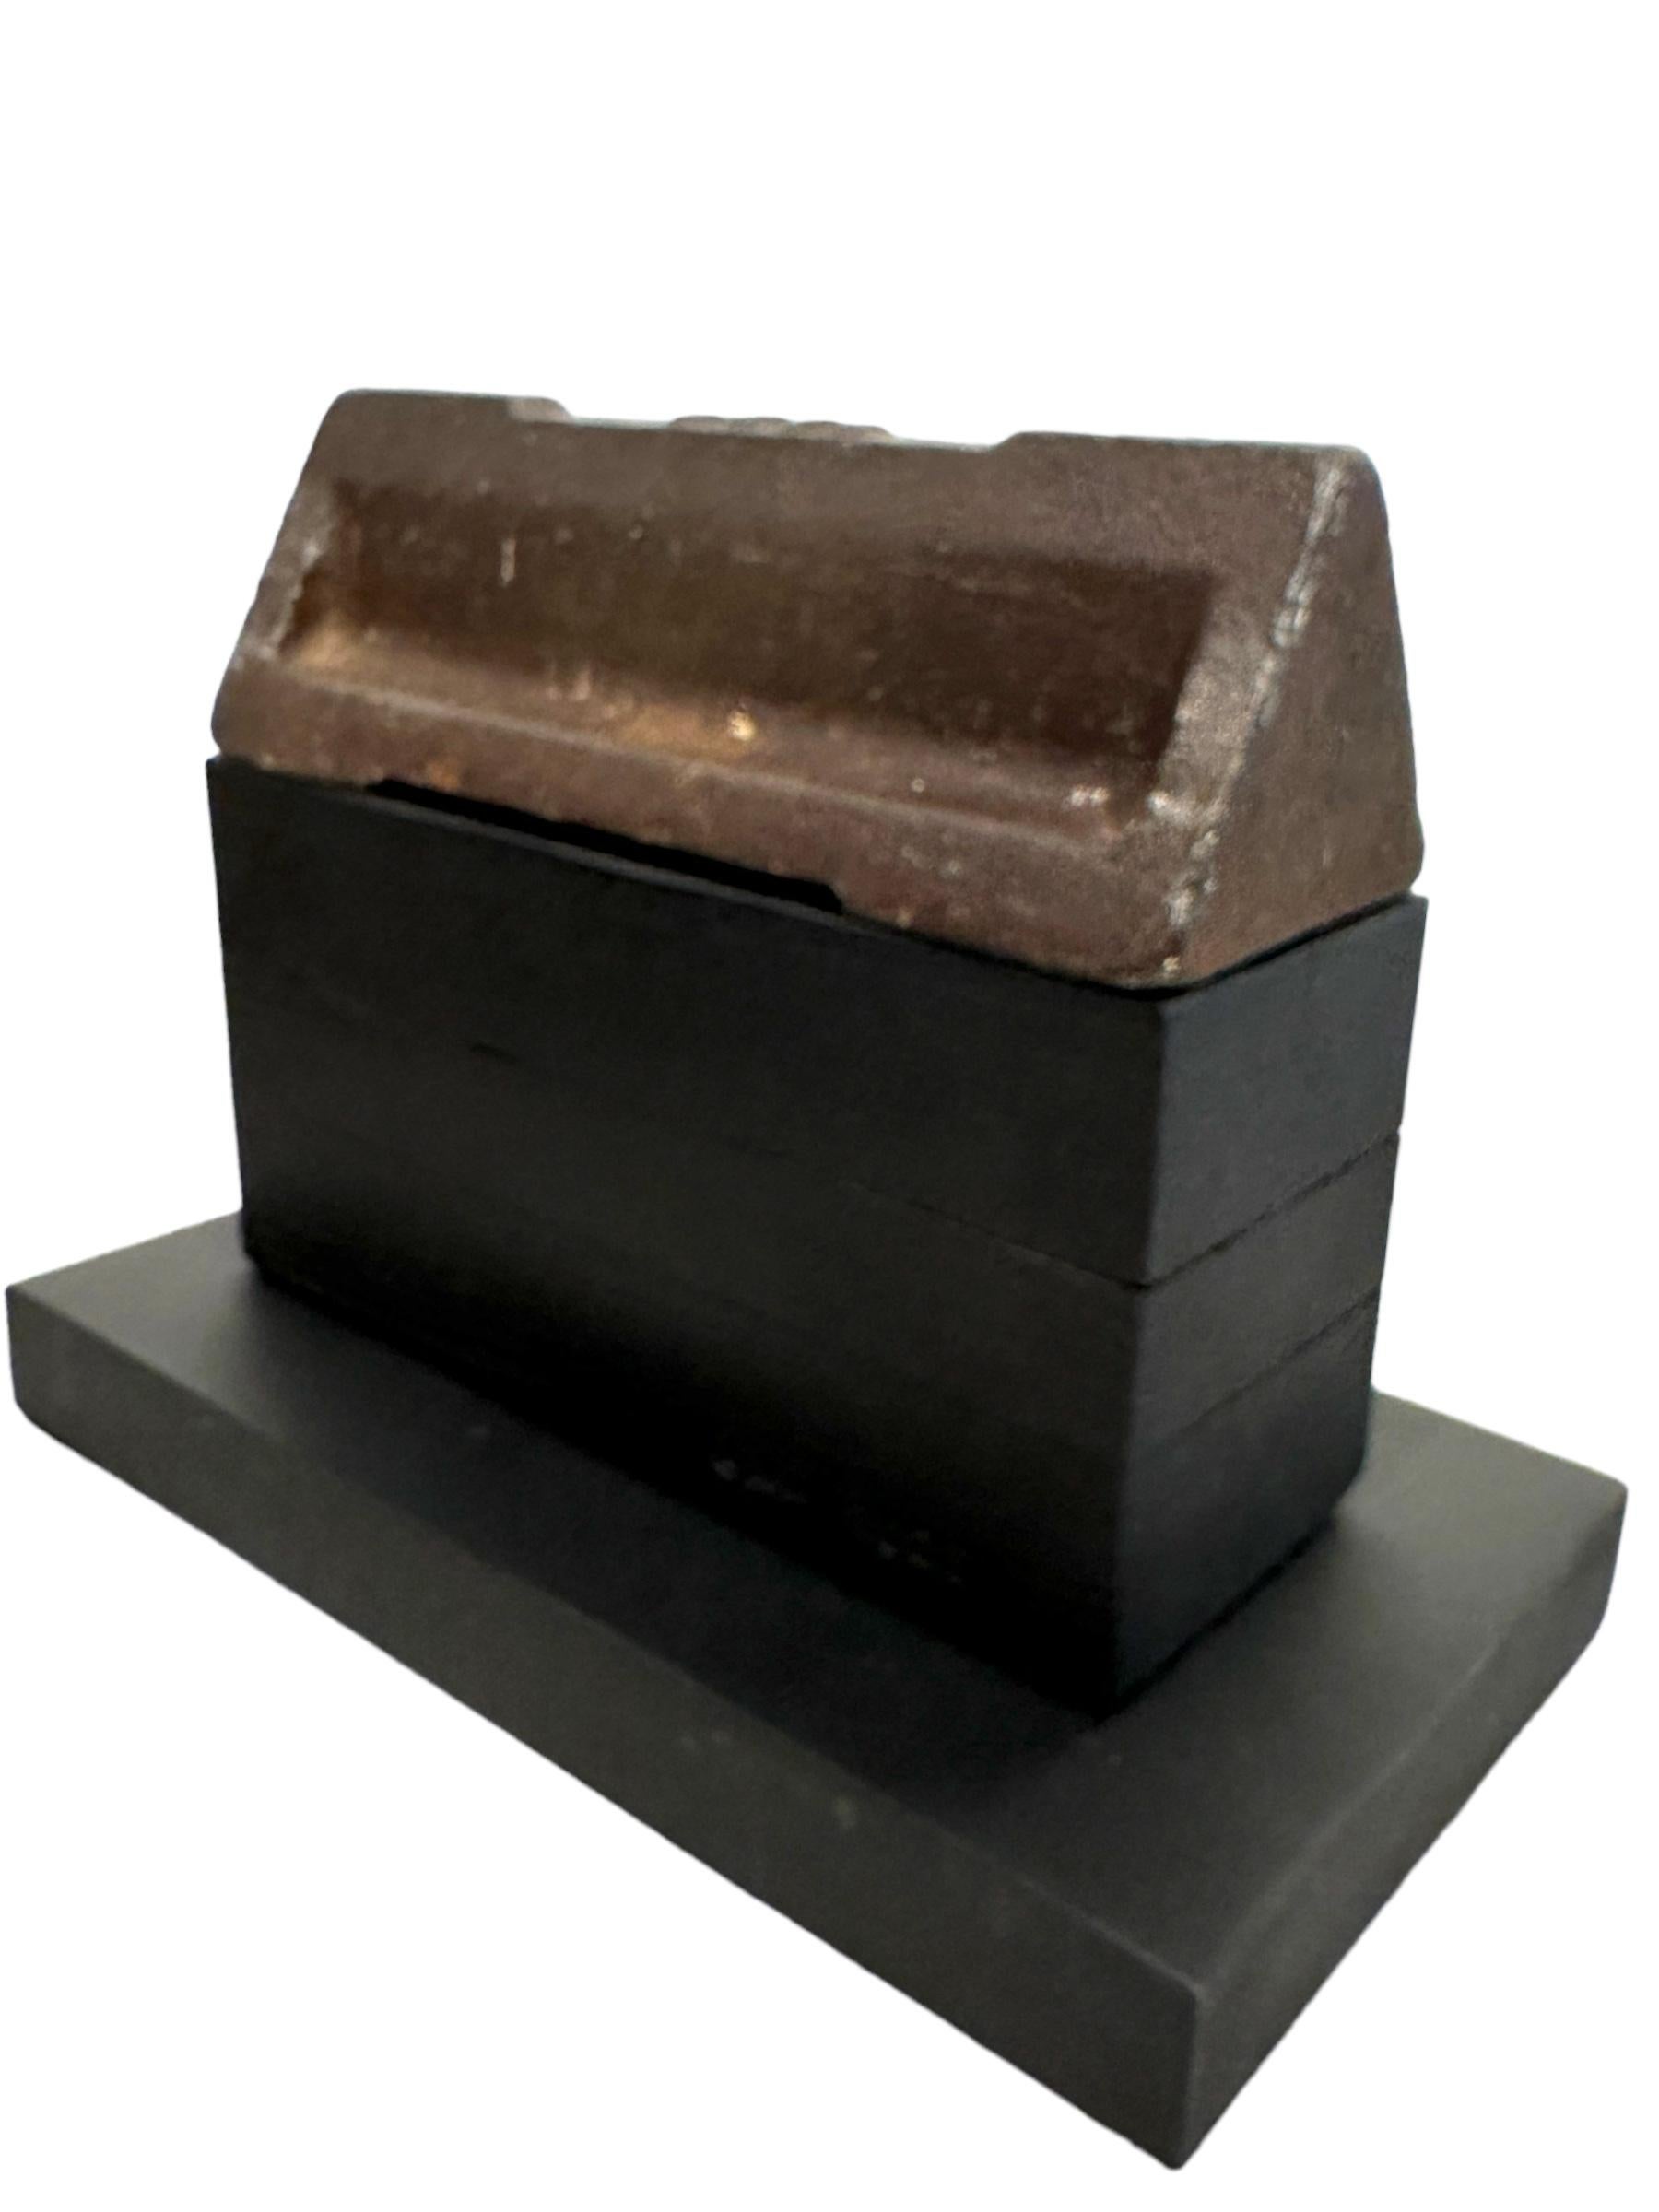 Metal House Sculpture, Minimalist Modern Structure, Rusted Steel Wedge on Wood Blocks For Sale